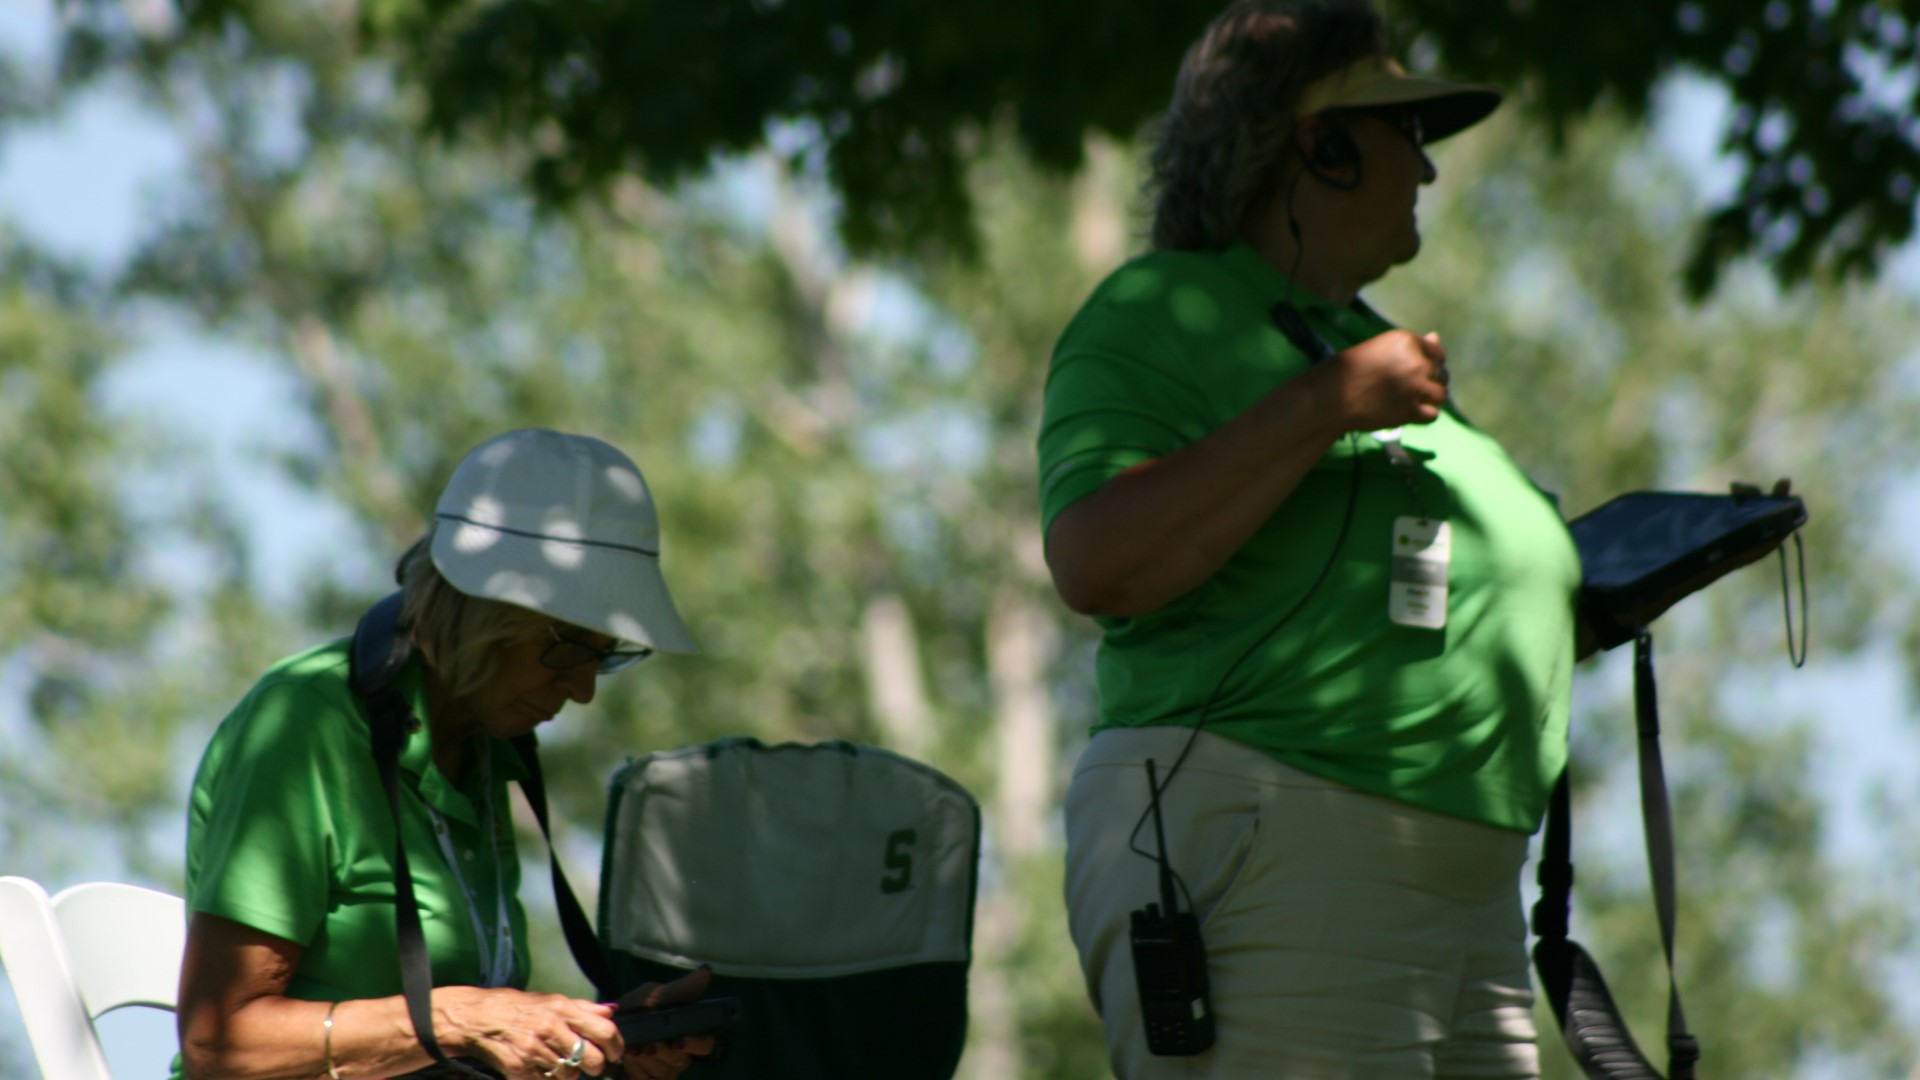 There's still time to sign up! Volunteers get free admission all week, lunch everyday you work, a free t-shirt and a free round of golf at TPC Deere Run.